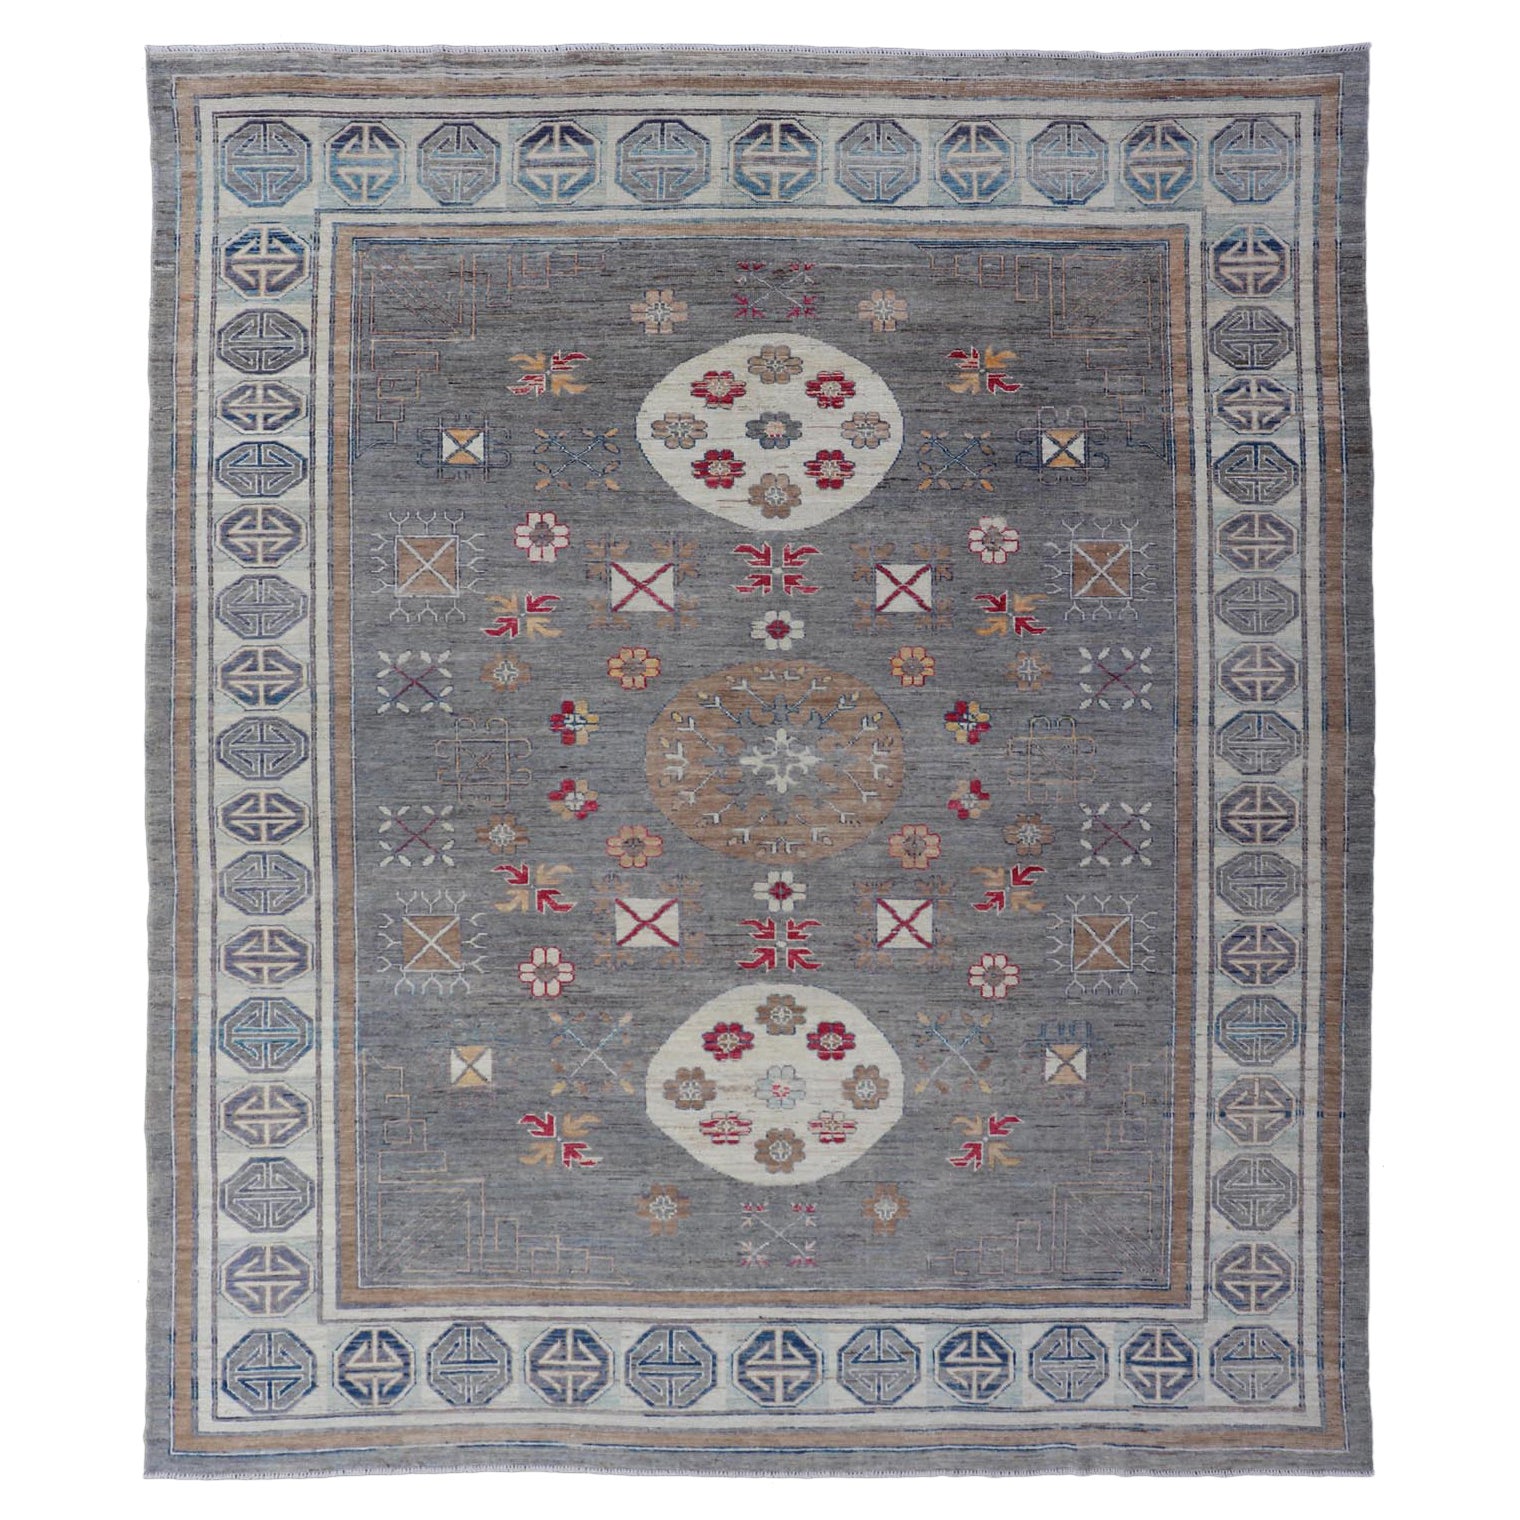 Modern Khotan Rug with Medallions in Shades of Gray, Red, and Brown